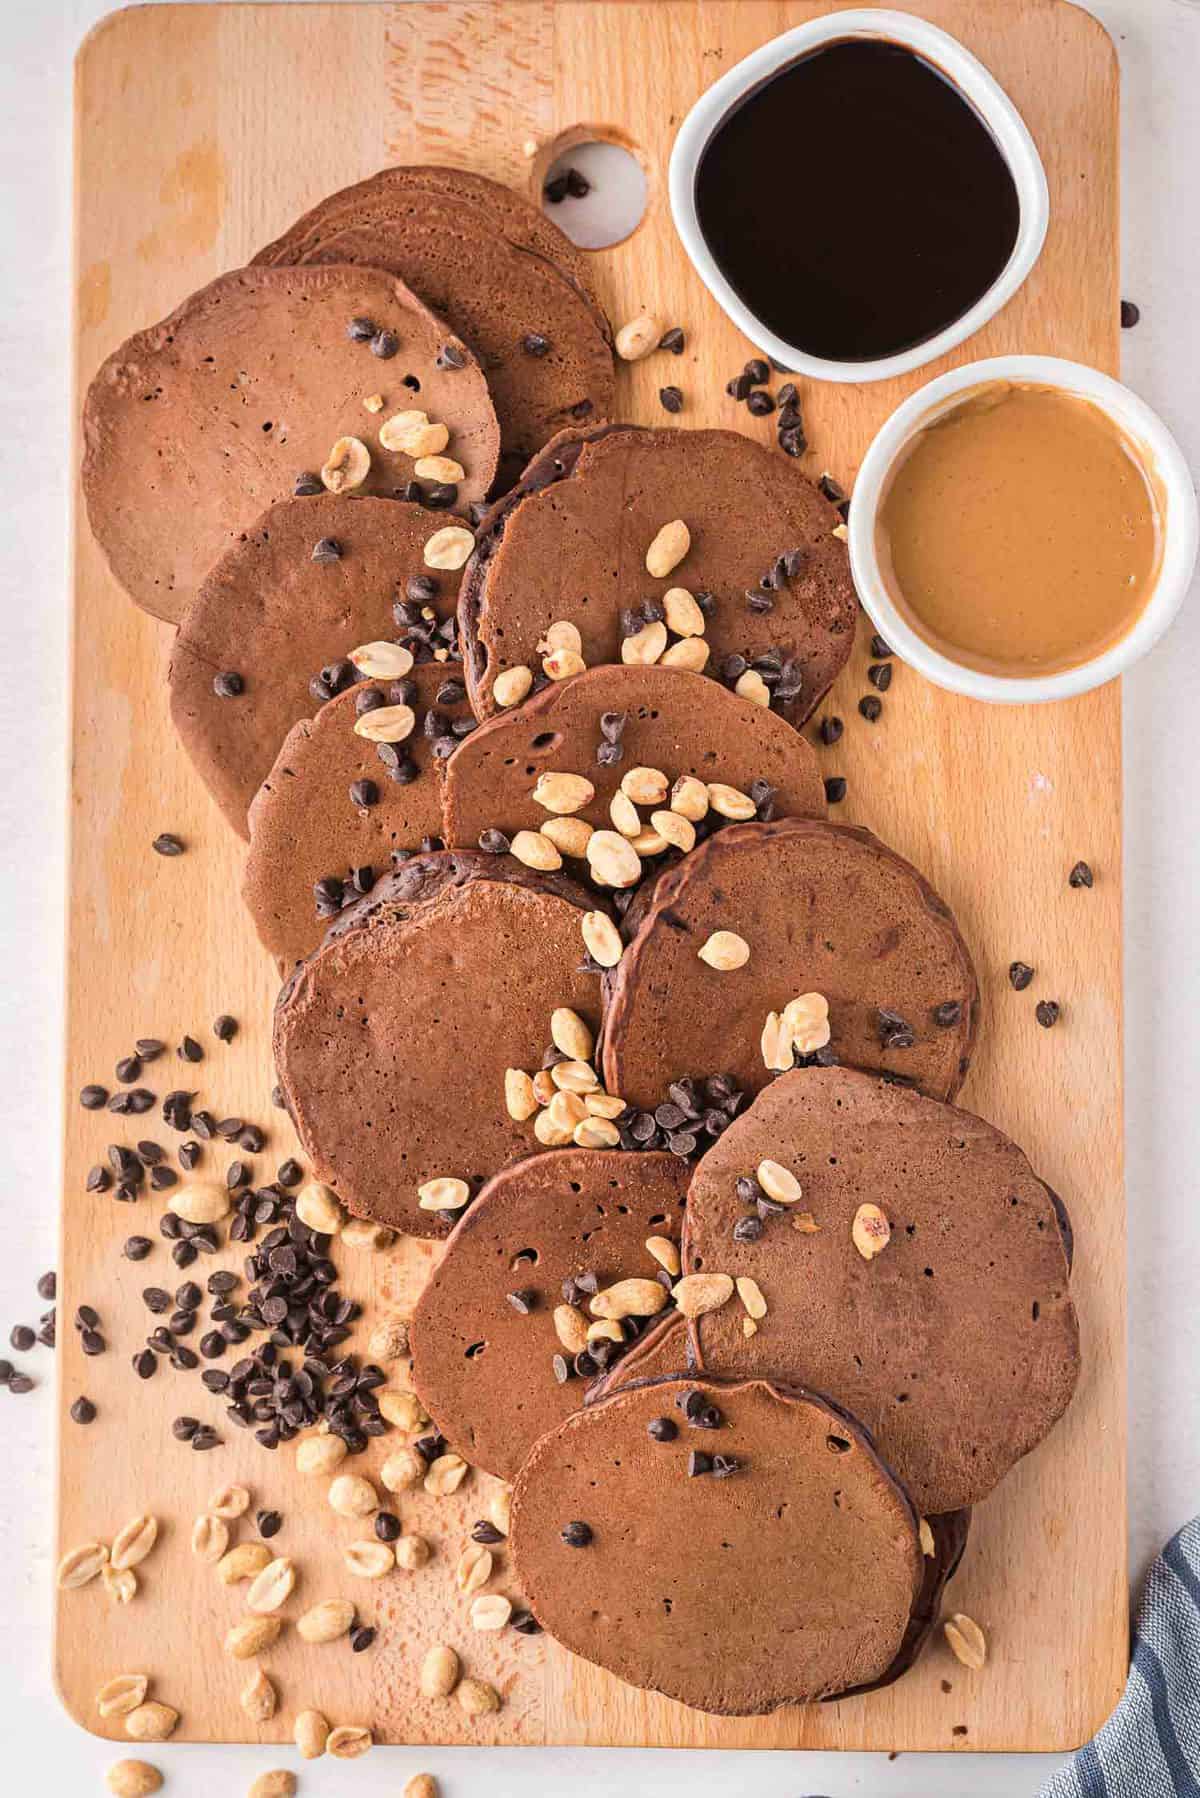 Platter of chocolate pancakes sprinkled with peanuts and chocolate chips.